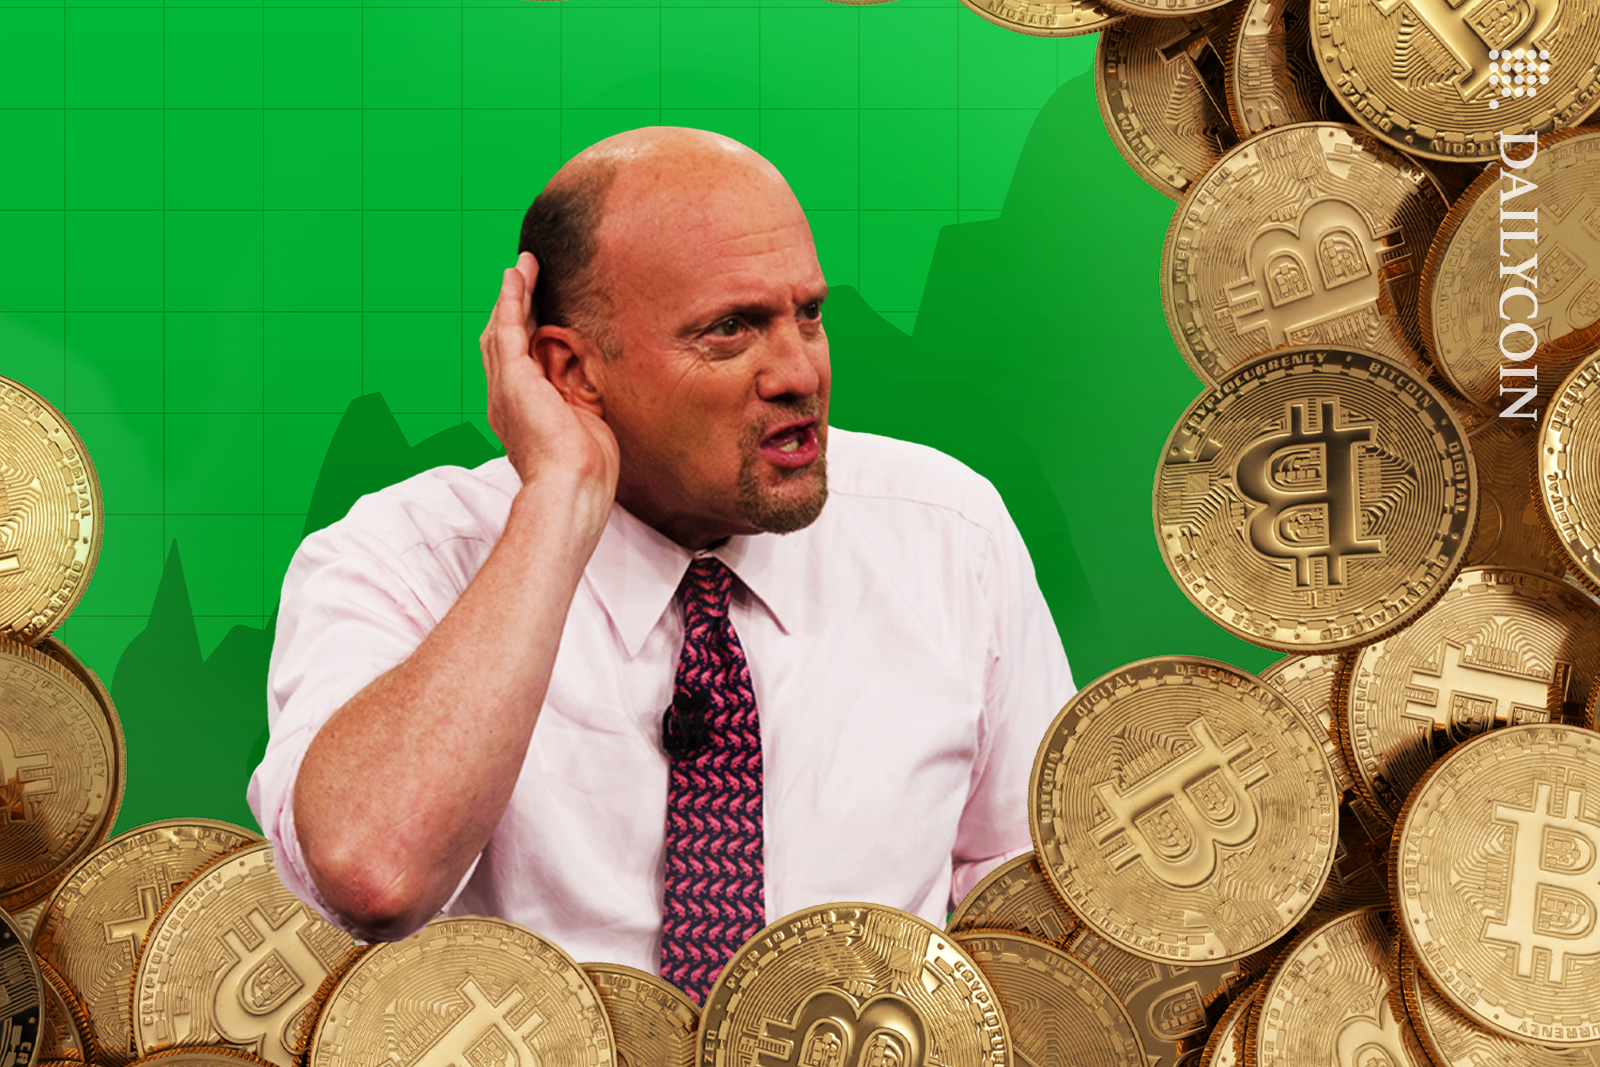 Jim Cramer wants to hear what you have to say now about bitcoin being record green.